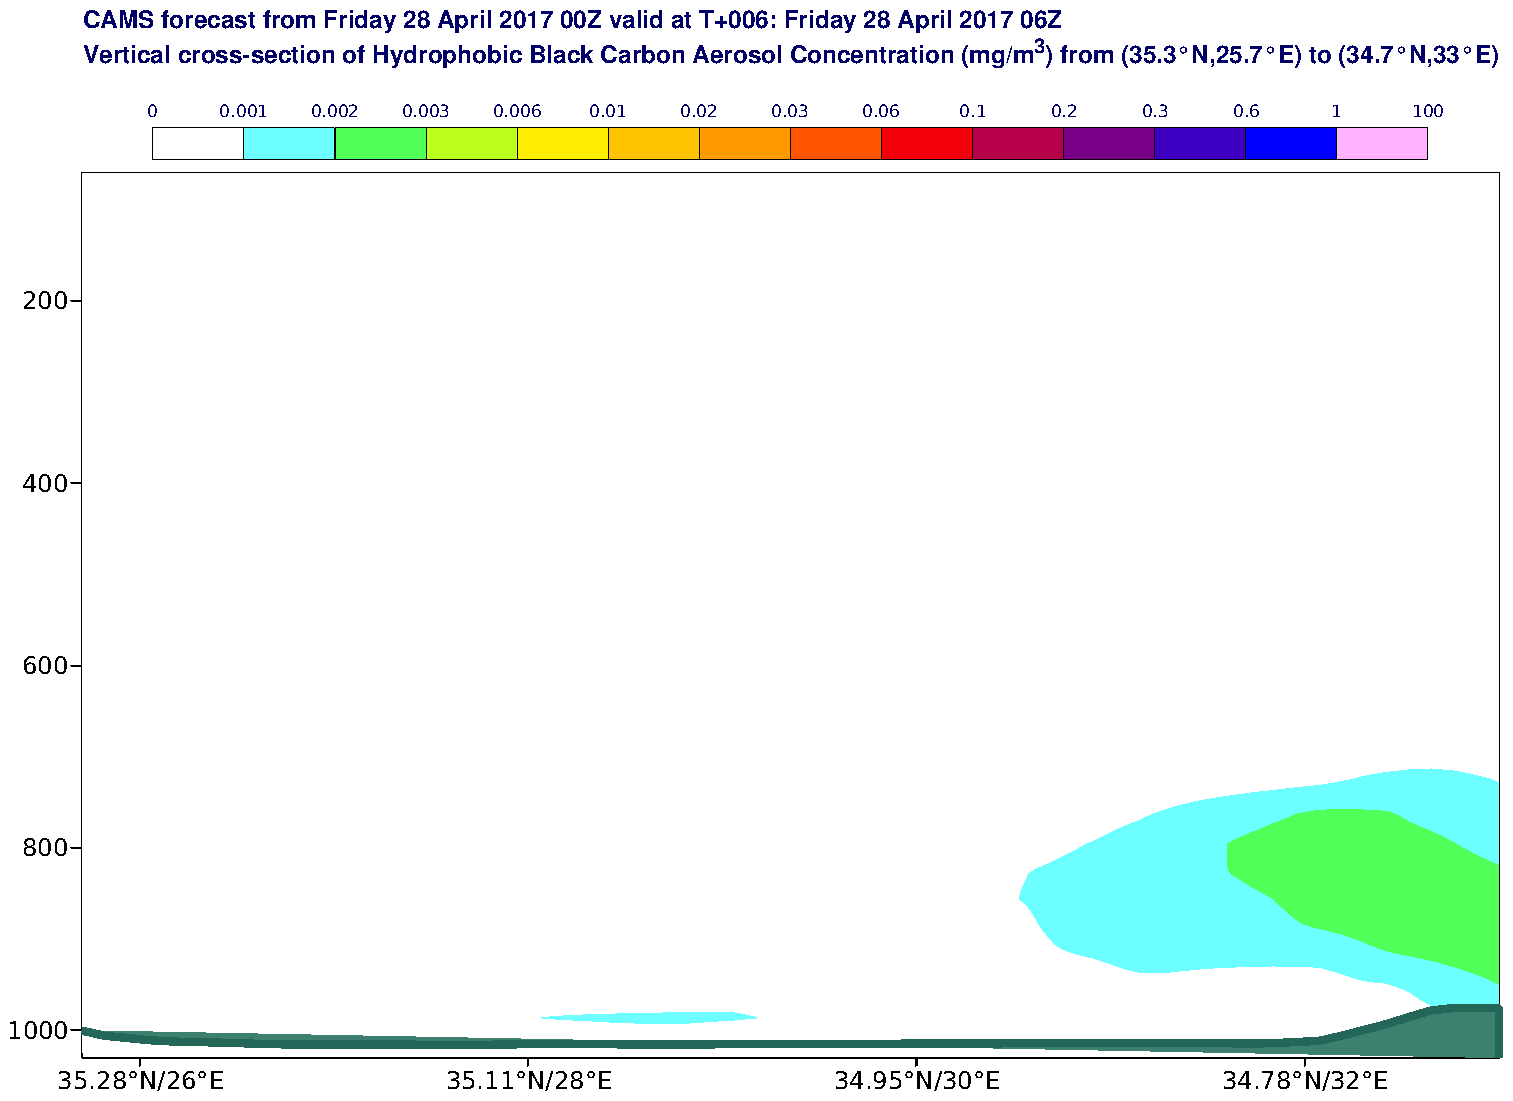 Vertical cross-section of Hydrophobic Black Carbon Aerosol Concentration (mg/m3) valid at T6 - 2017-04-28 06:00